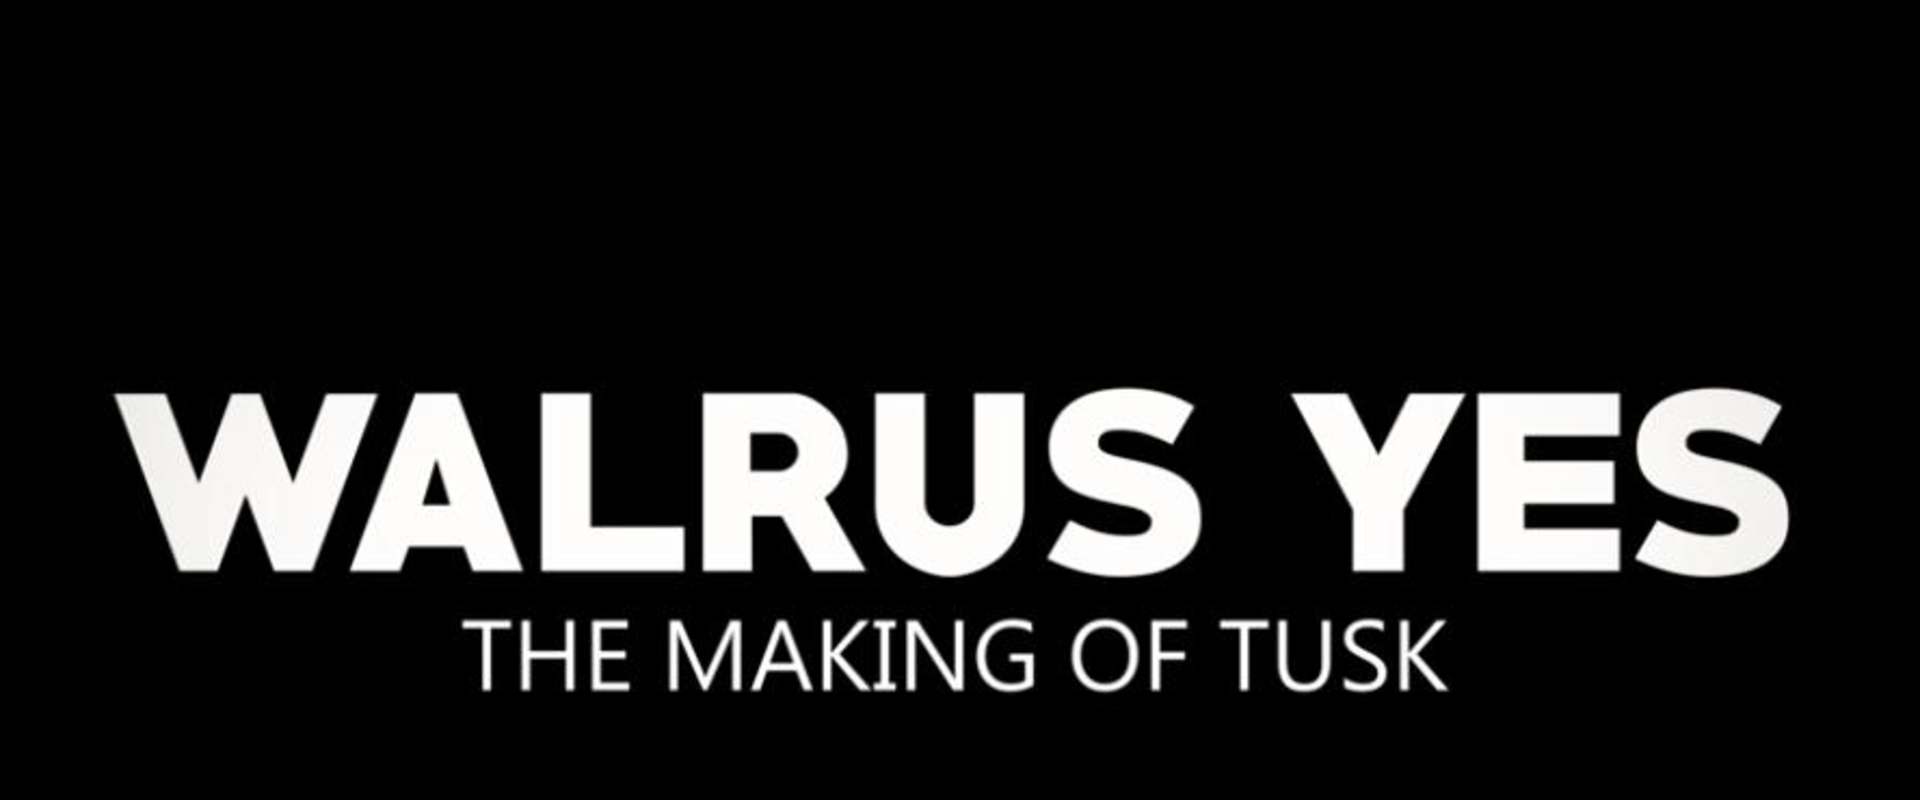 Walrus Yes: The Making of Tusk background 1